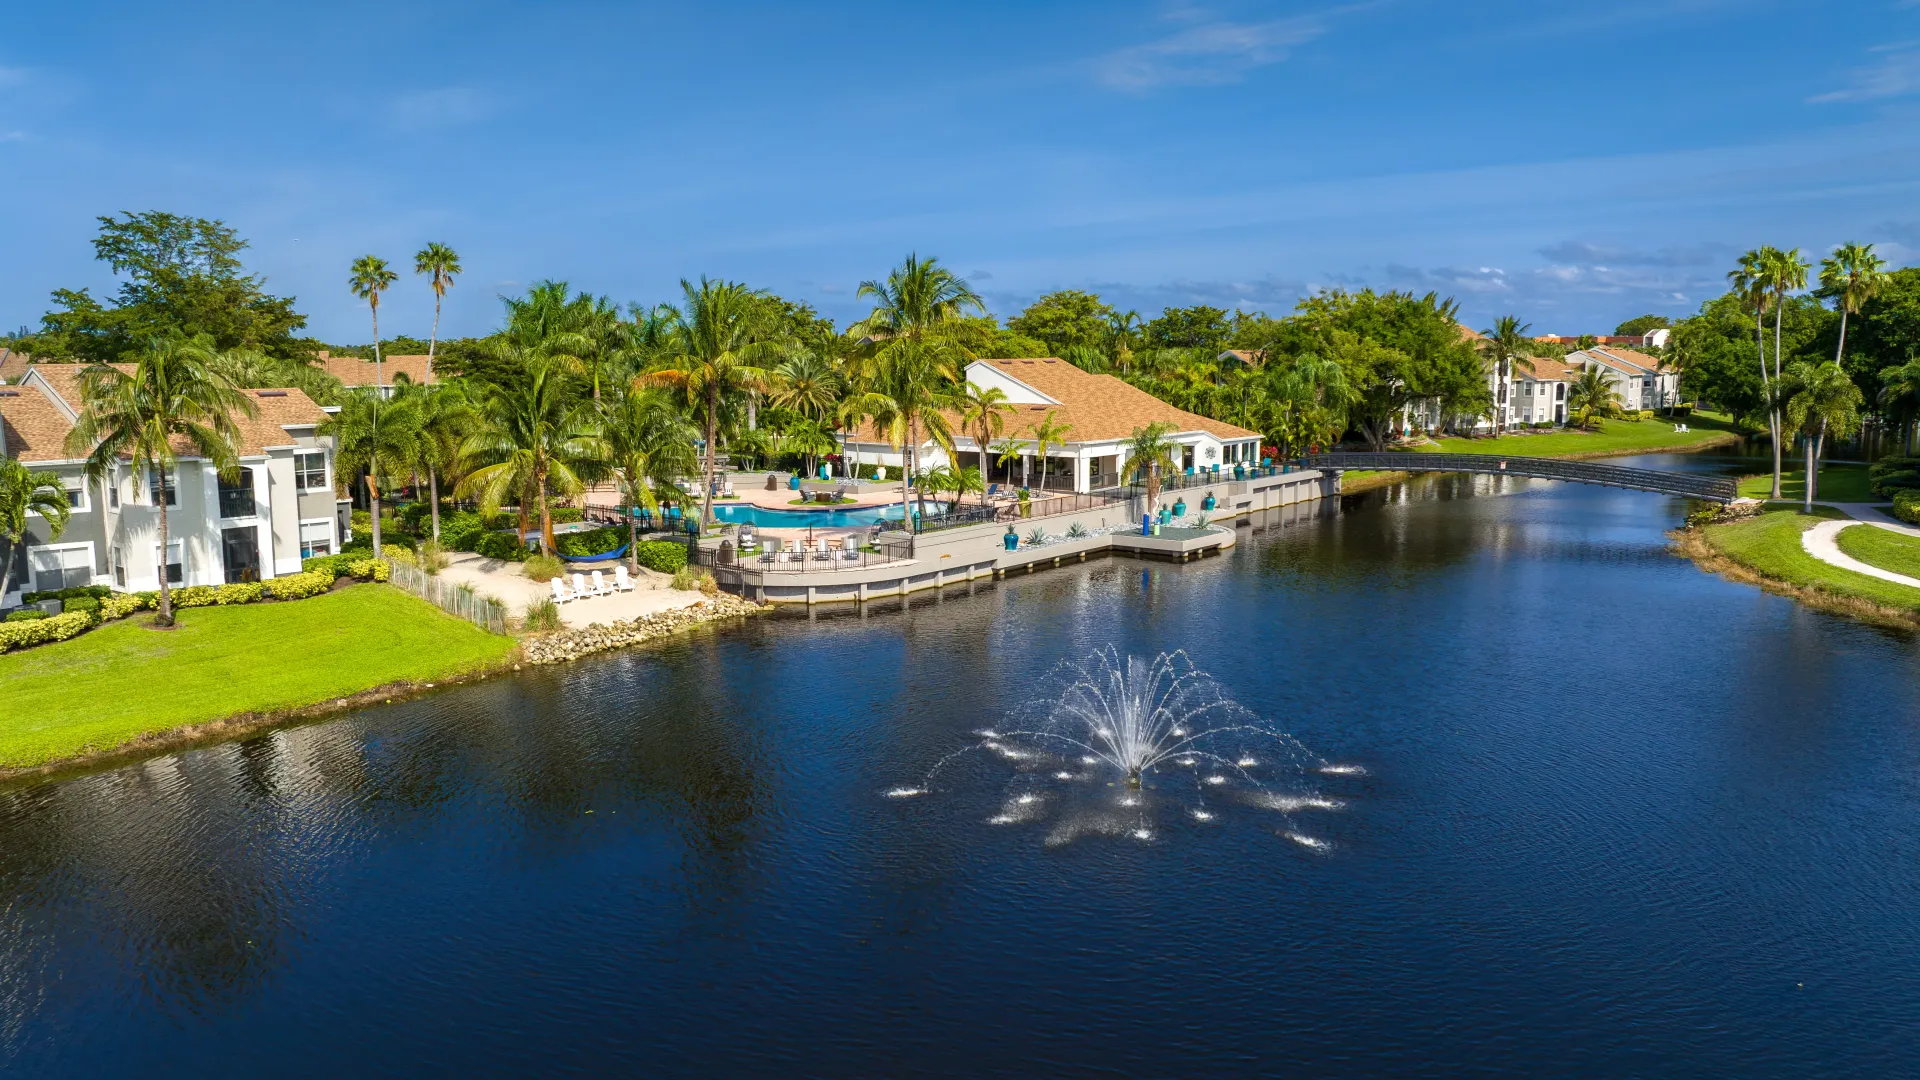 A picturesque aerial view showcases the vast pool deck, vibrant palm trees, and tranquil lakefront vistas, creating an inviting setting for pure waterside relaxation amidst breathtaking natural beauty.